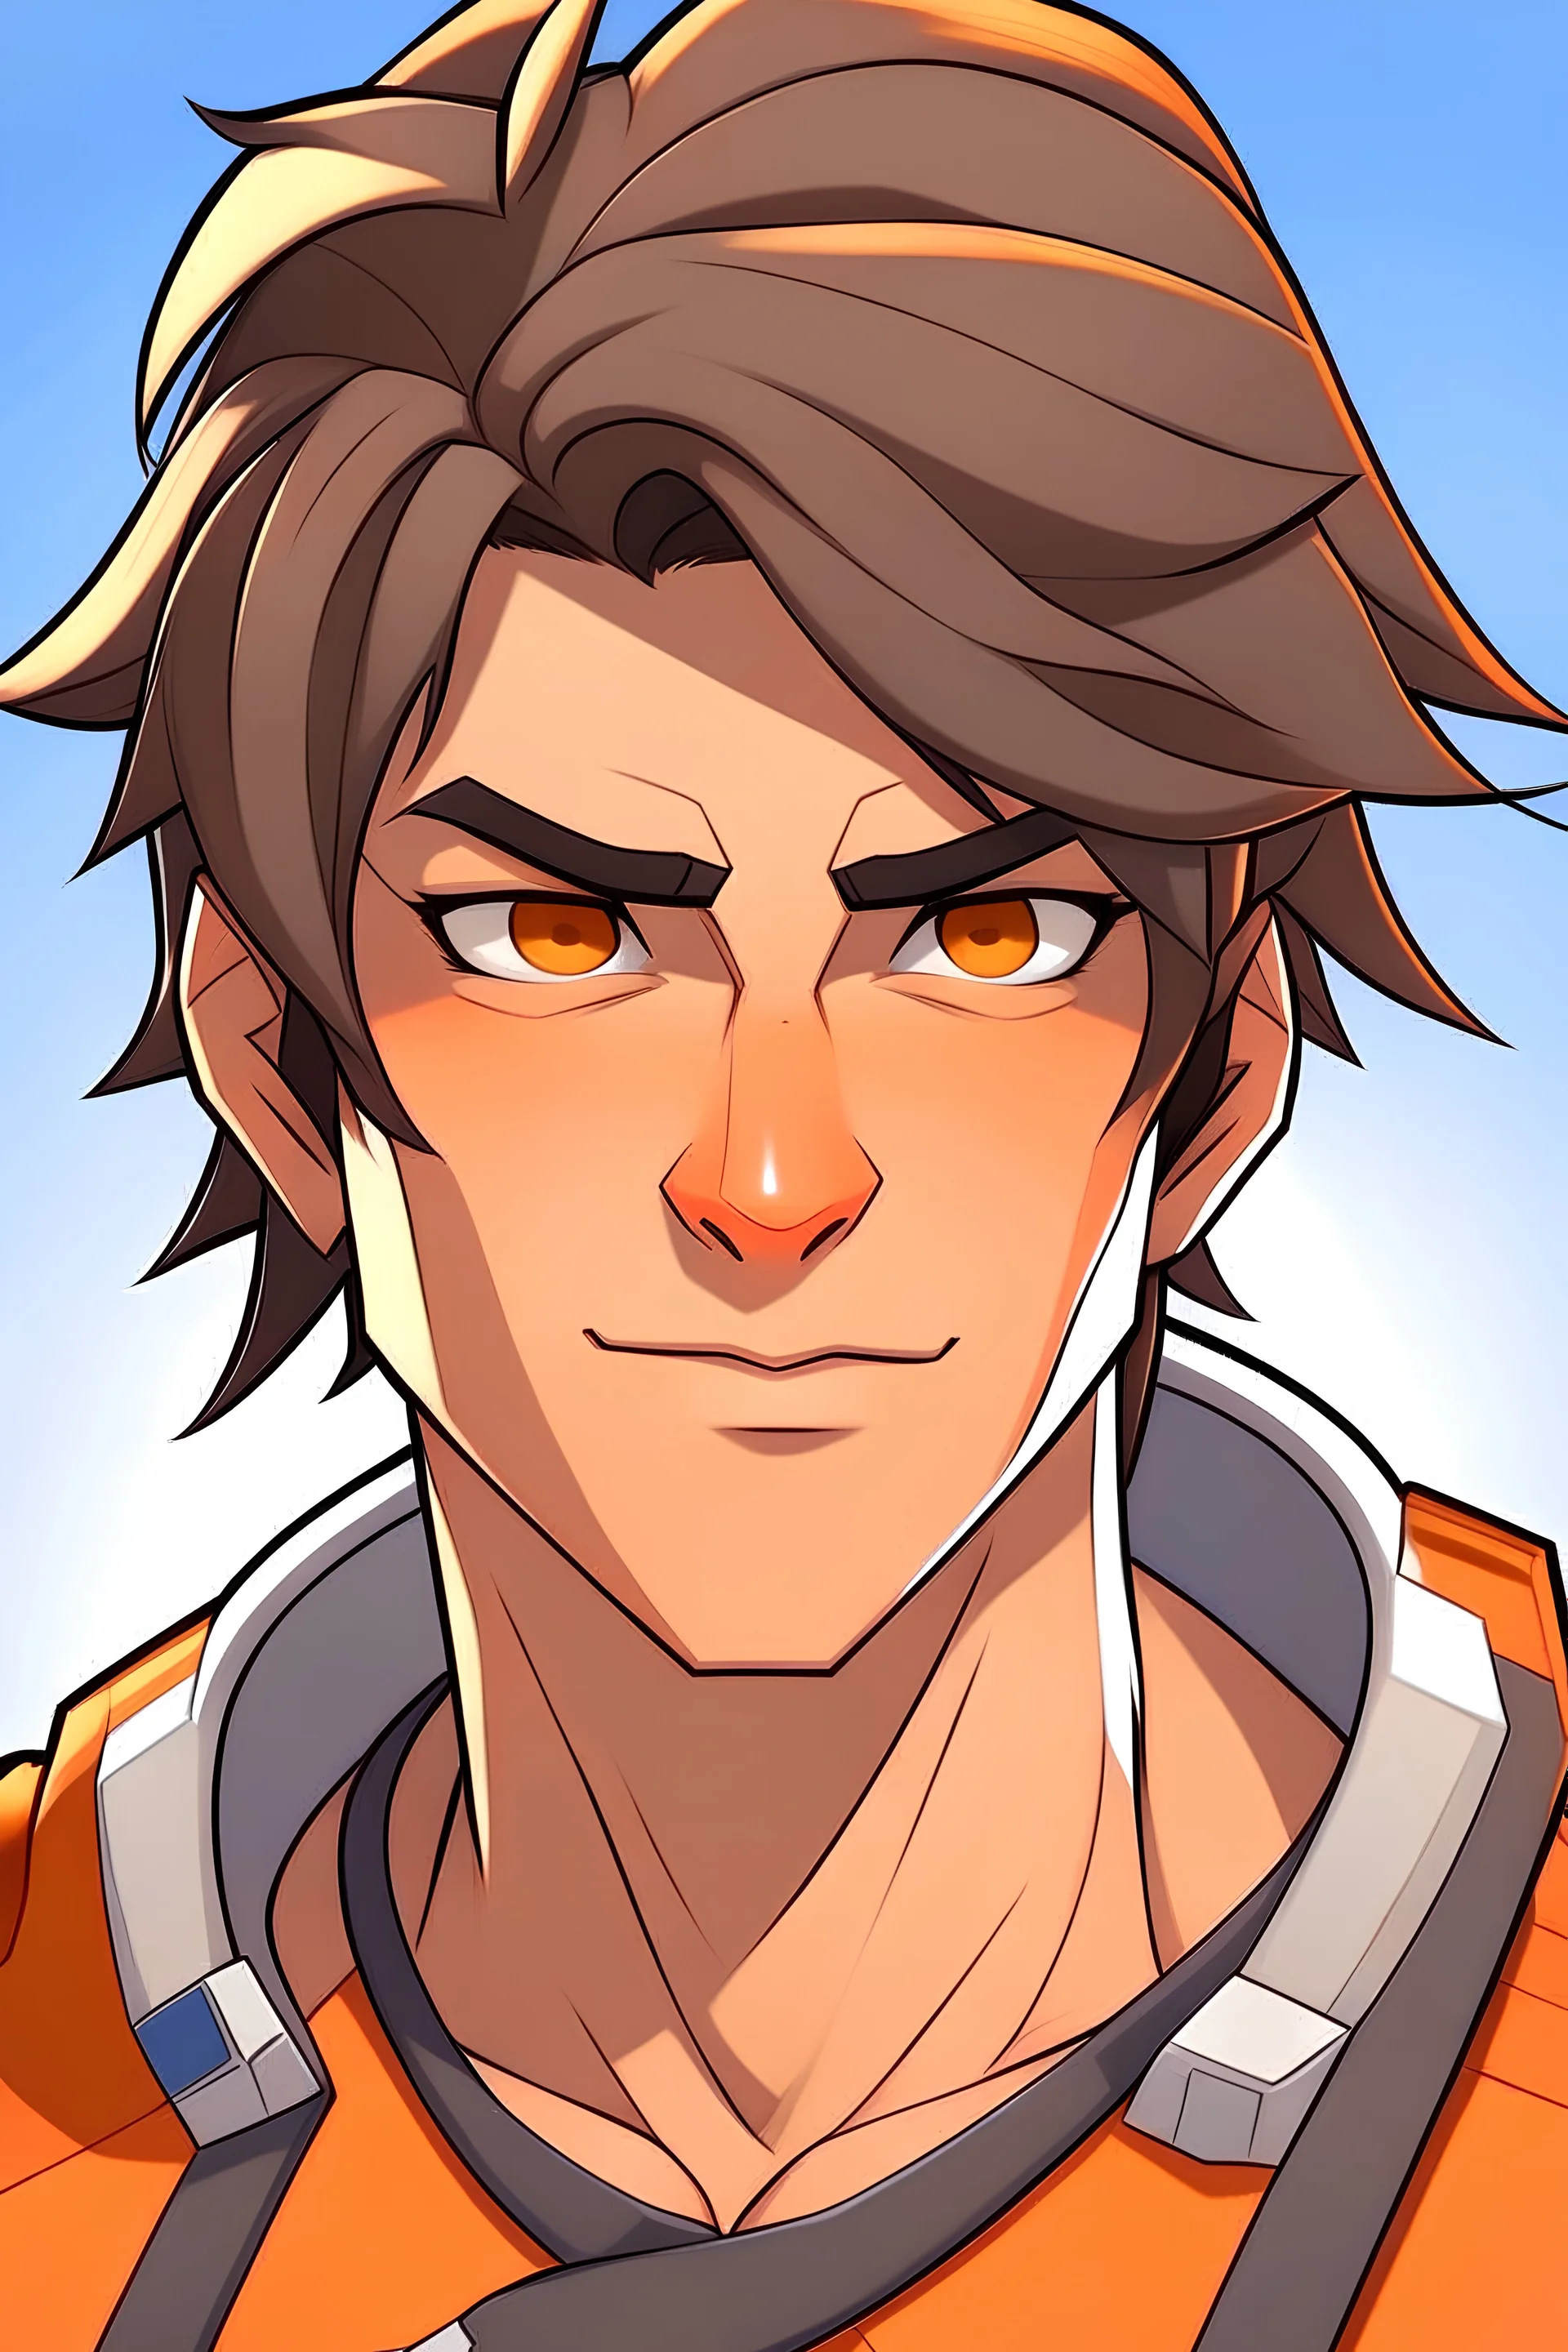 Young man, brown hair, slightly muscular, drawn in the art style of Overwatch